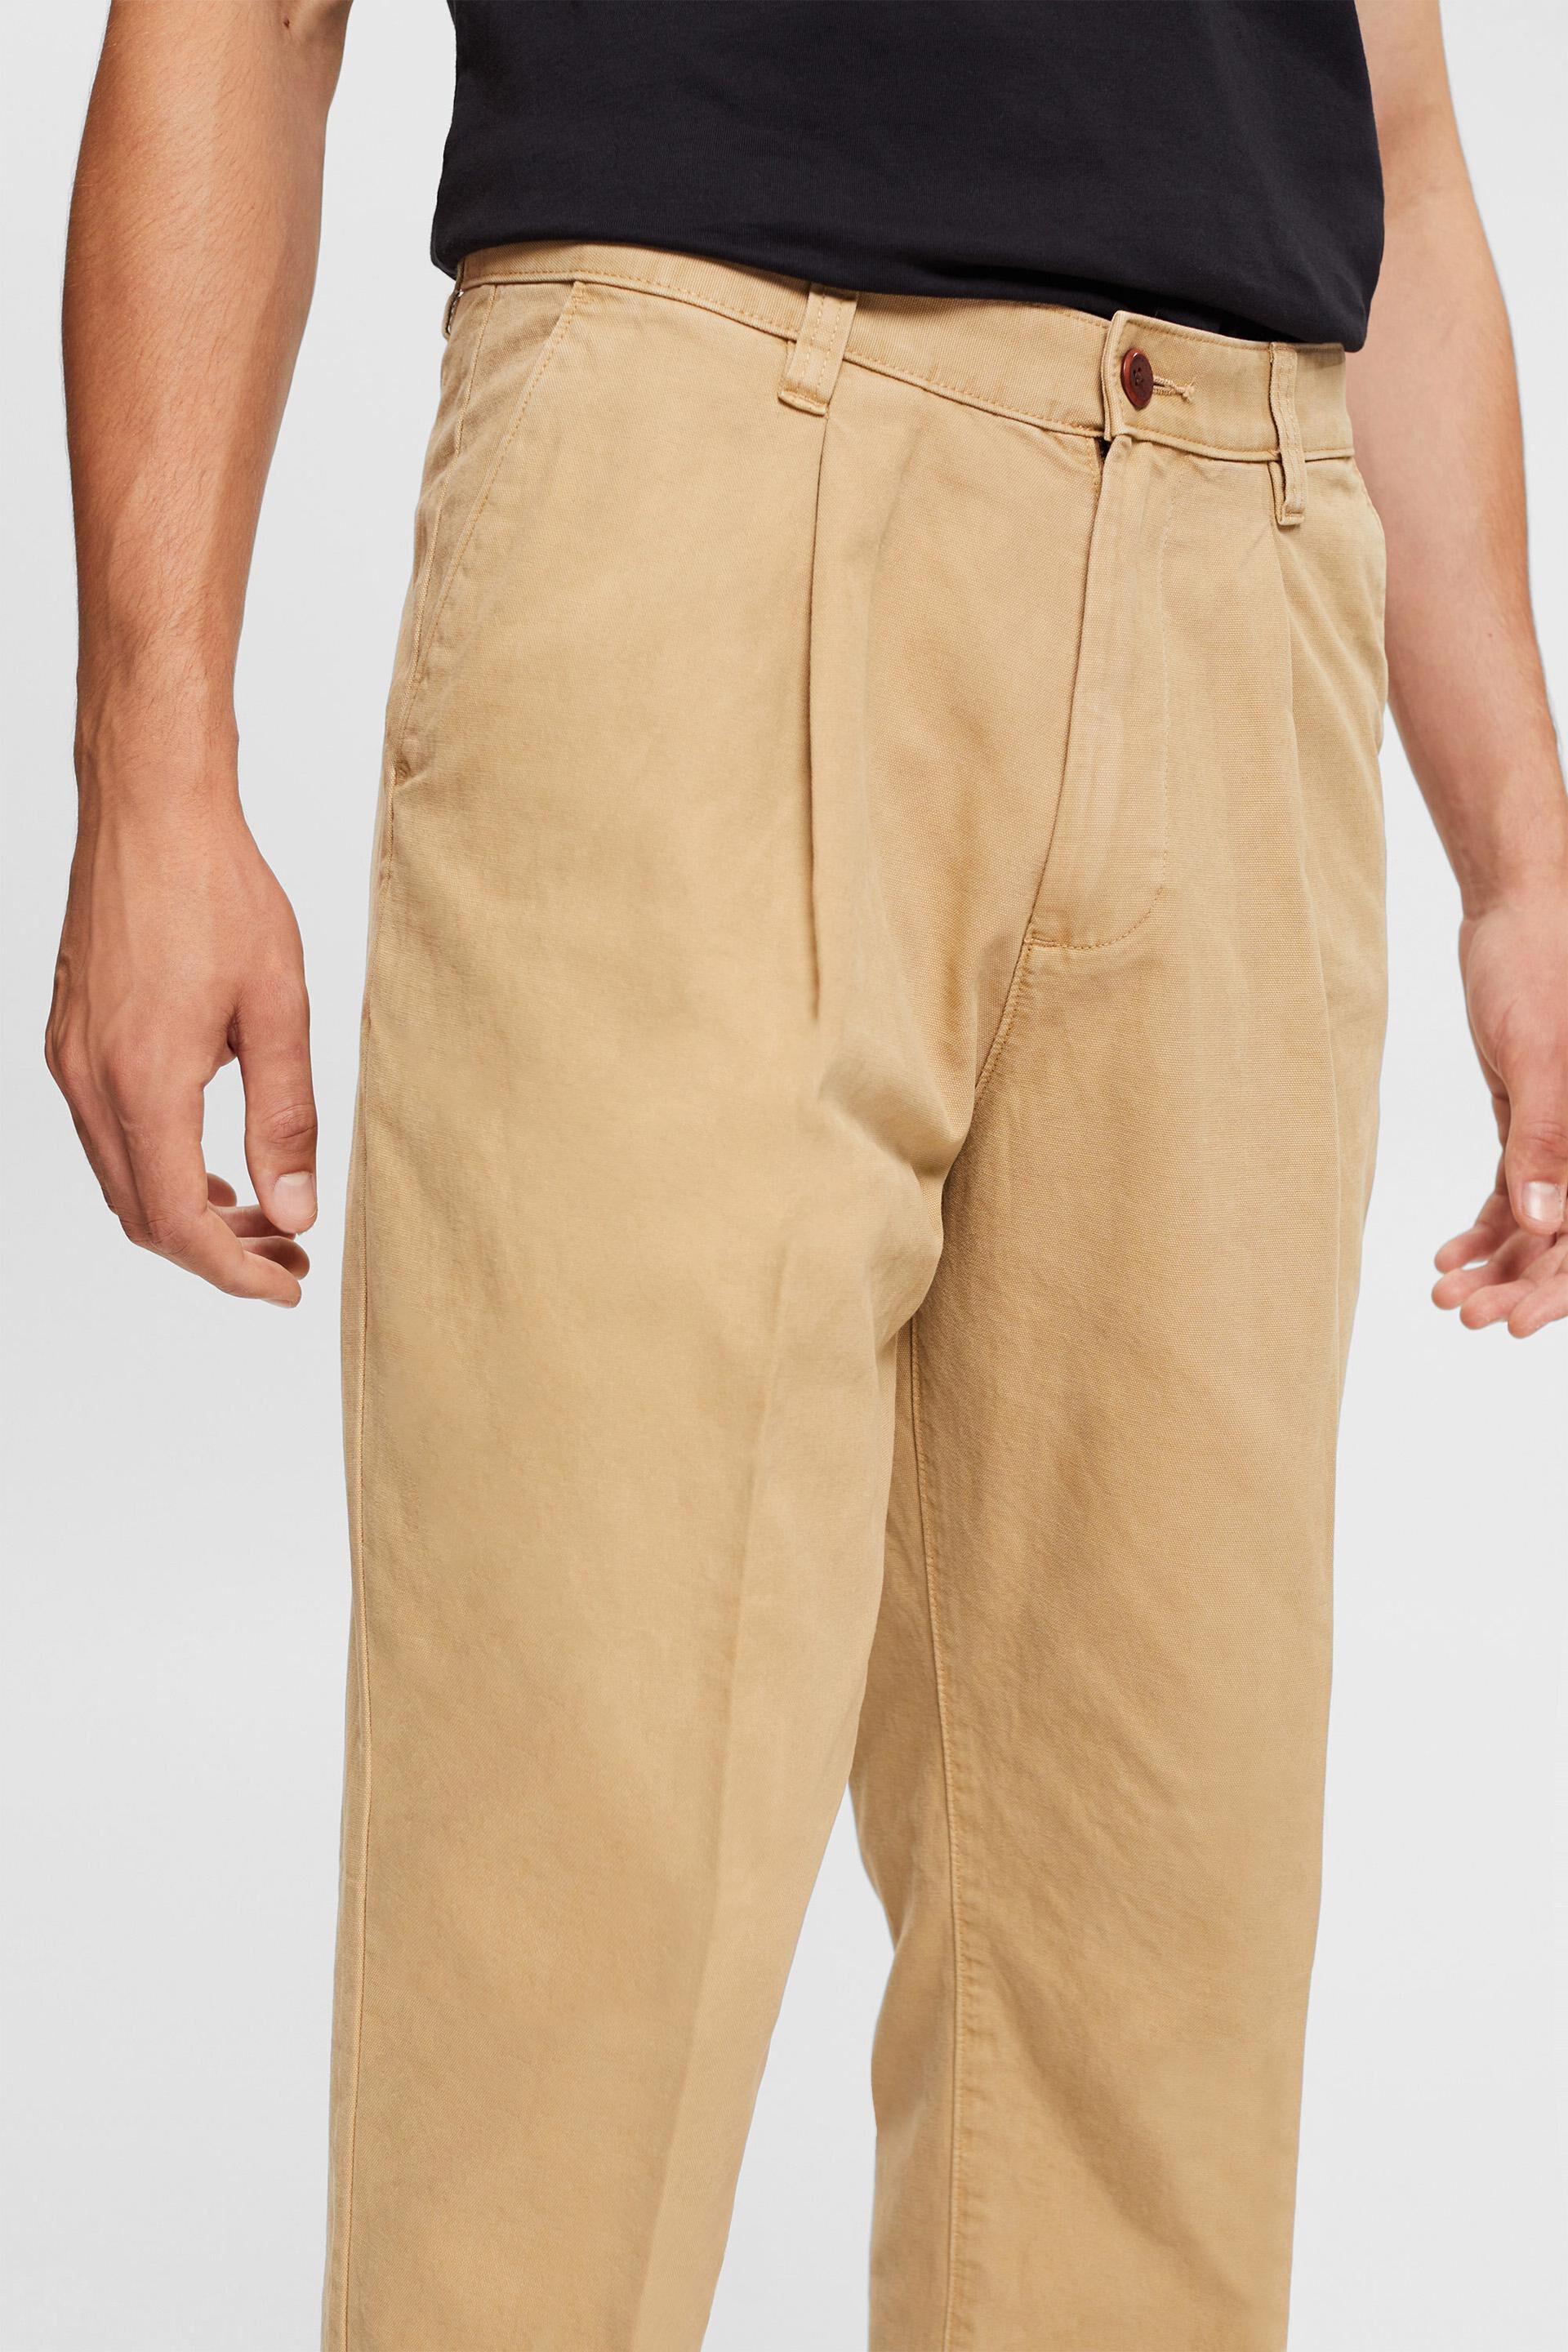 BDG Baggy Skate Fit Vintage Wash Chino Pant | Urban Outfitters Singapore  Official Site